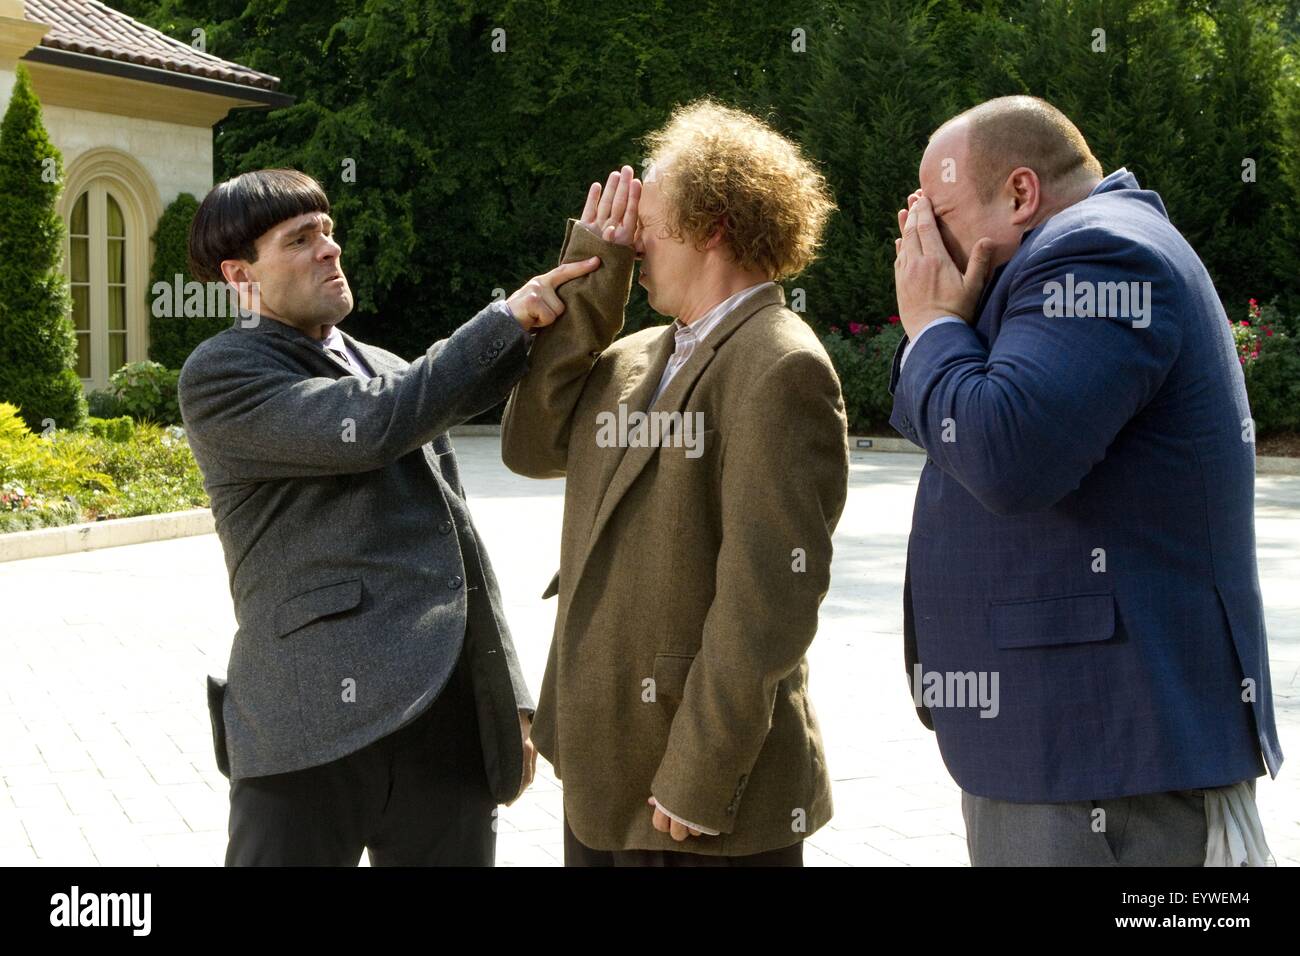 The Three Stooges ; Year : 2012 USA ; Director : Peter Farrelly, Bobby Farrelly ; Chris Diamantopoulos, Sean Hayes, Will Sasso ; Photo: Peter Iovino Stock Photo